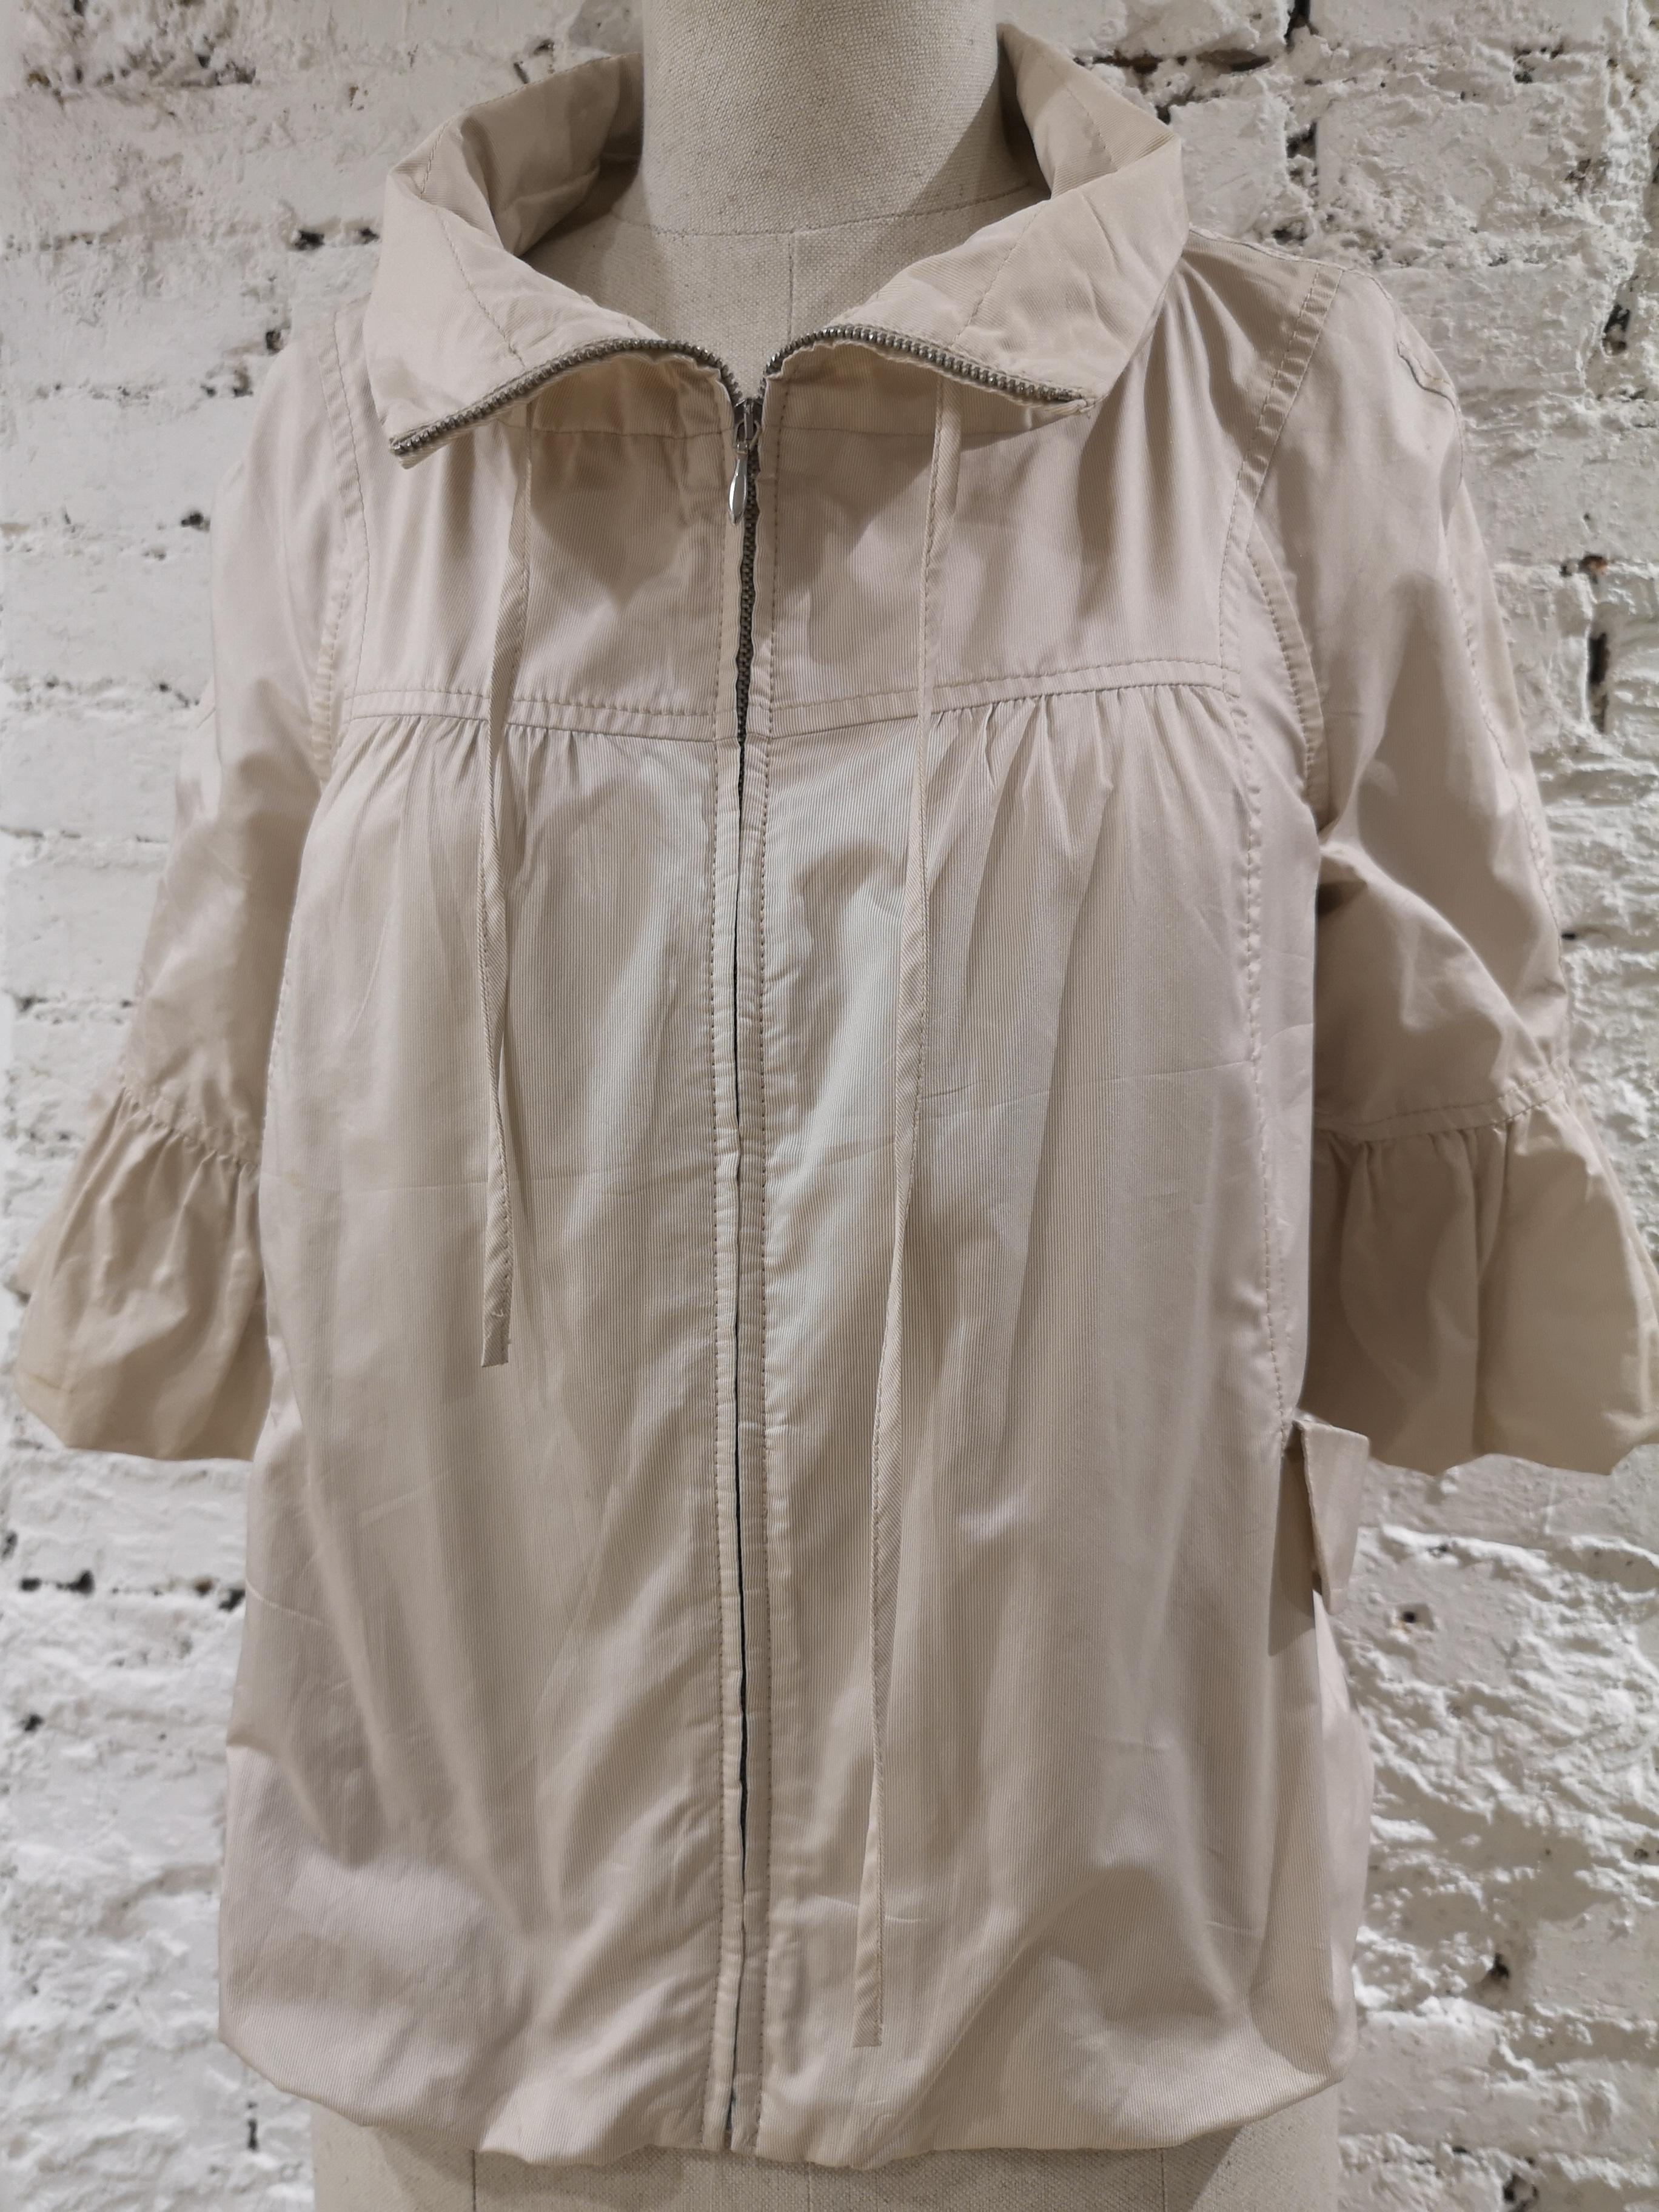 Marcella Rosati beige jacket
totally made in italy in size 42